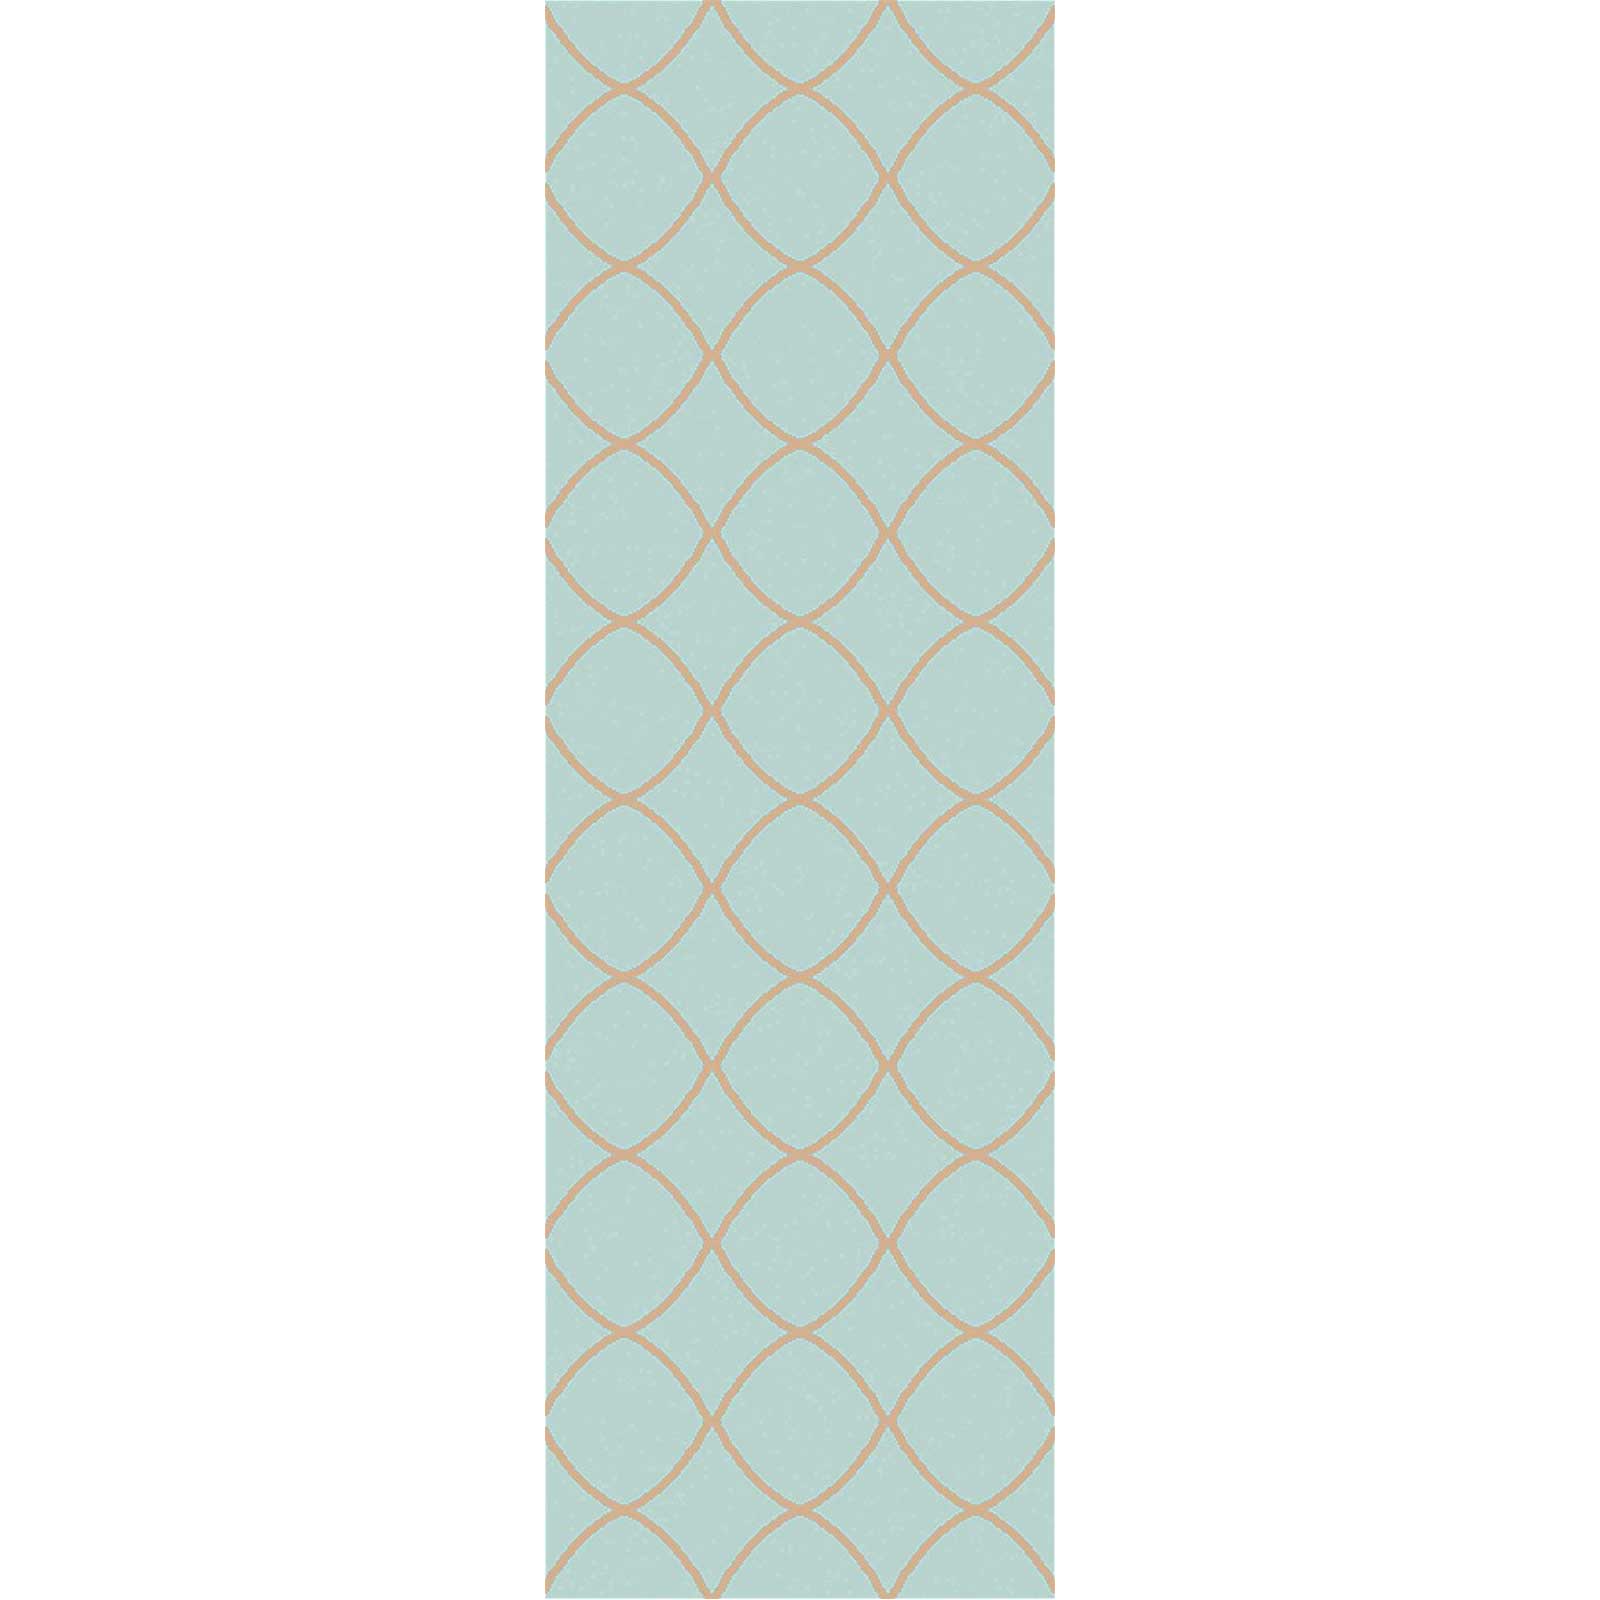 Laural Peace Ivory/Mint Runner Rug